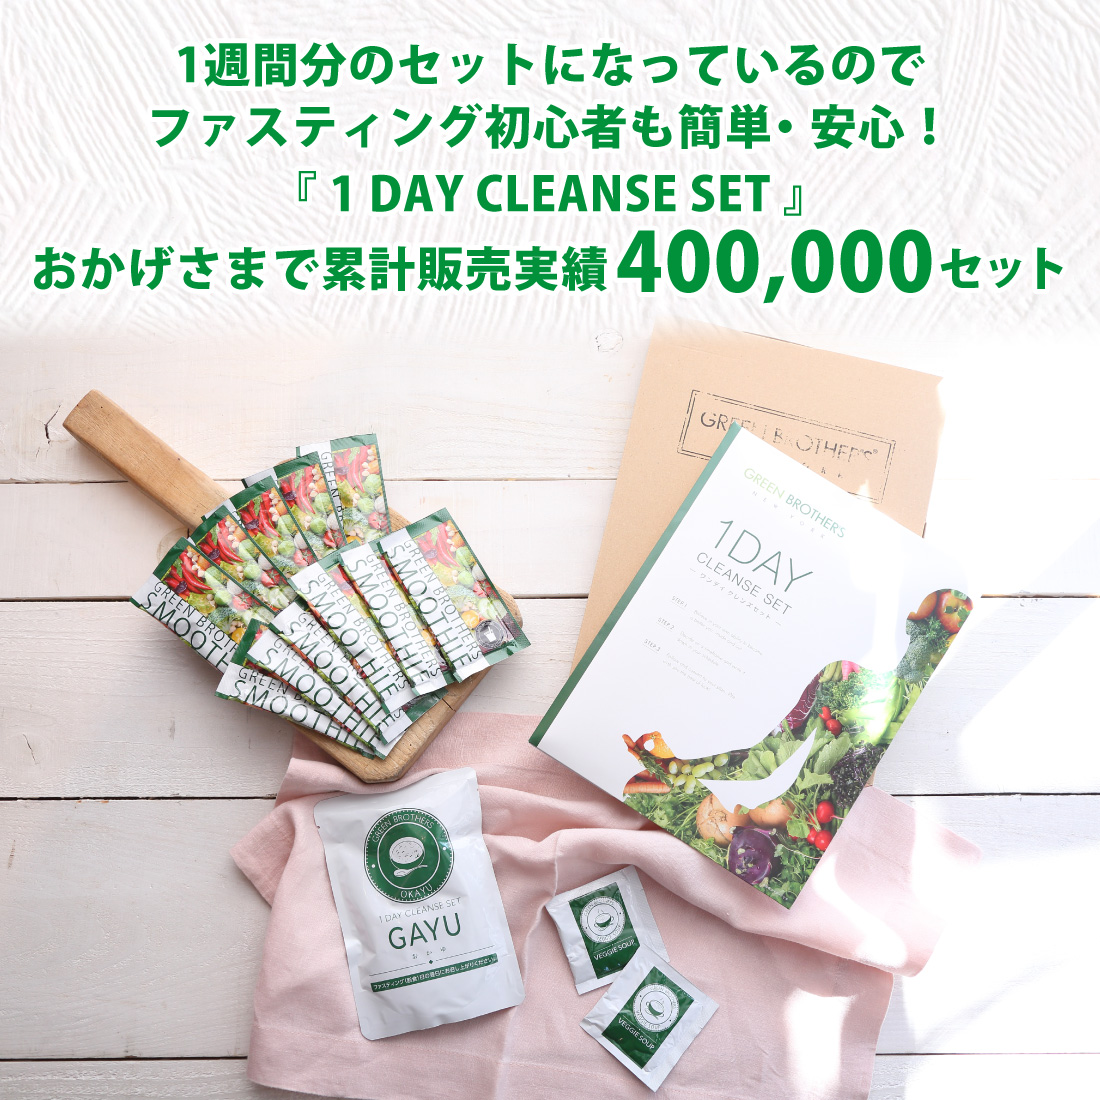 1DAY CLEANSE SET